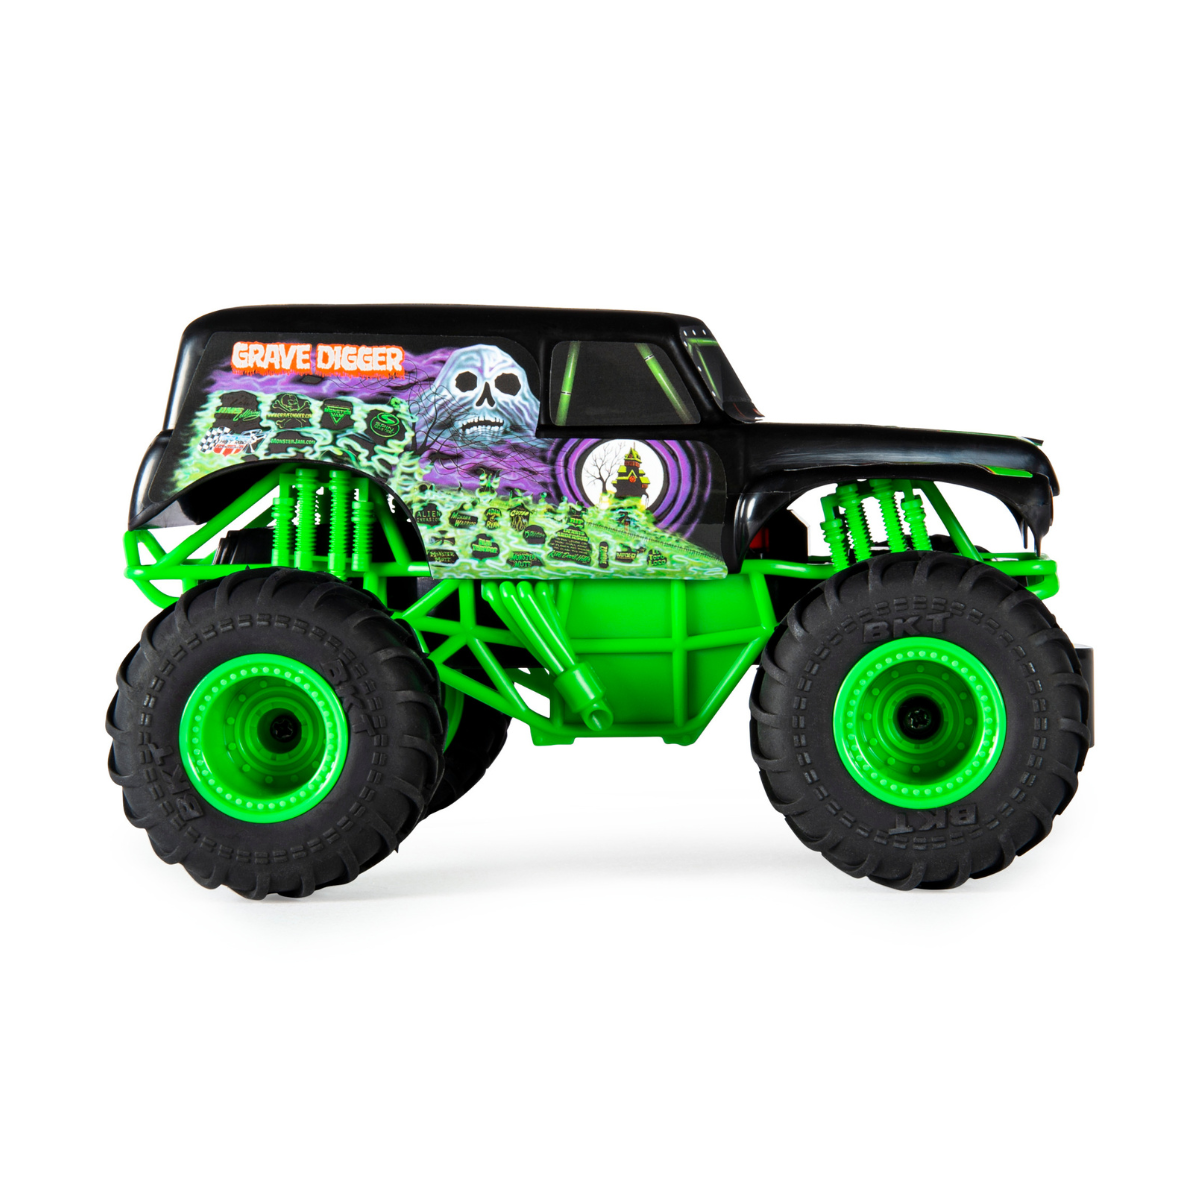 Grave Digger R/C 1:24